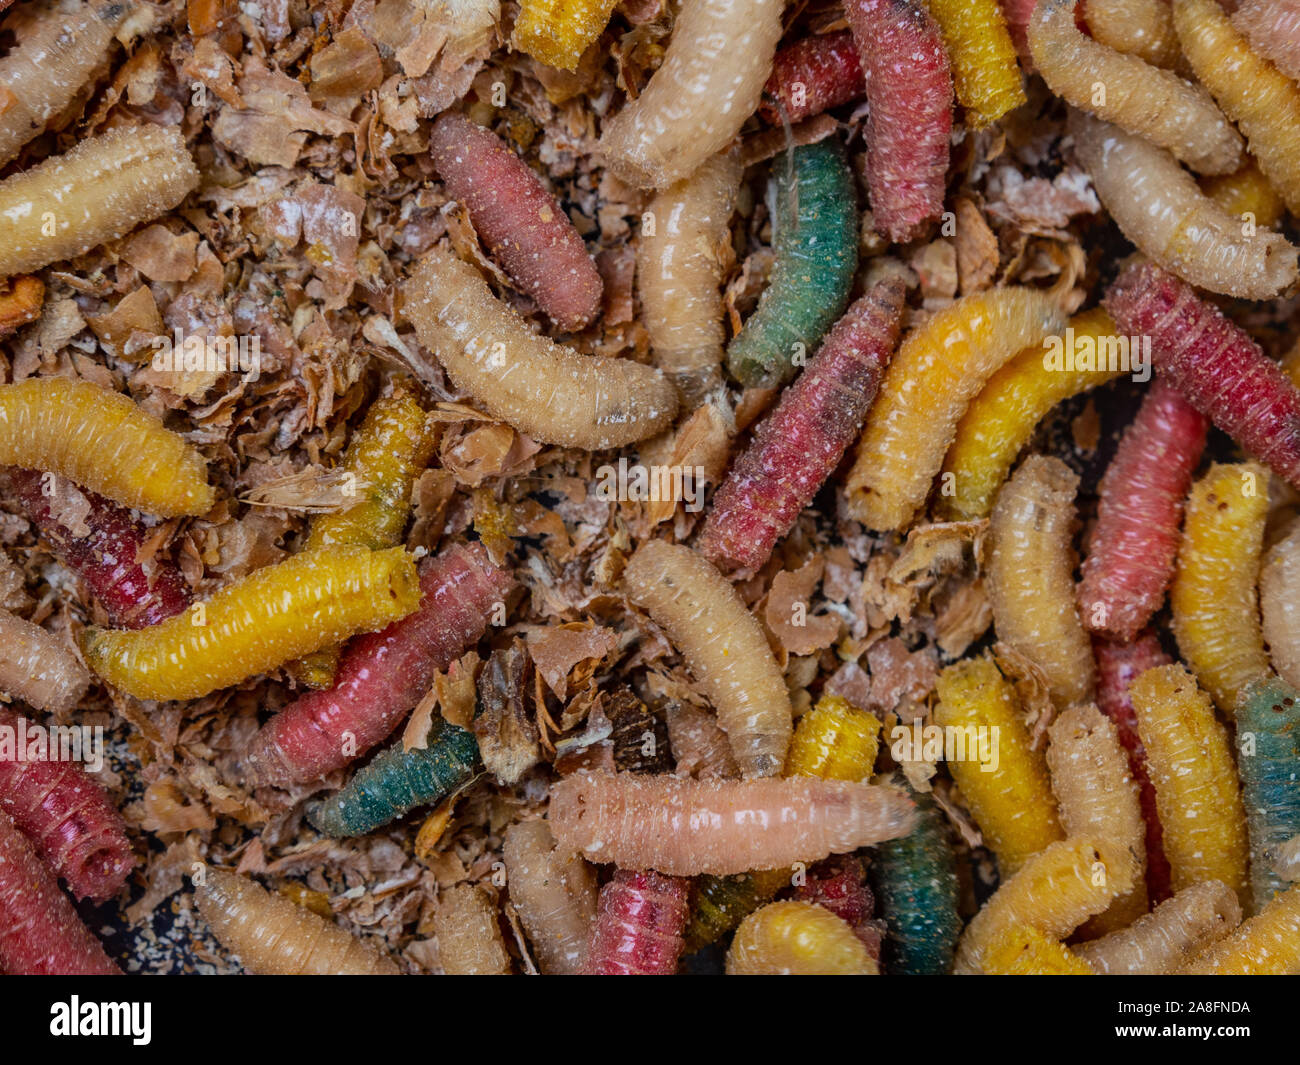 Colorful bugs. Larvae of flies. Fishing bait.  Lots of live, busy colorful worms. Top view. Stock Photo